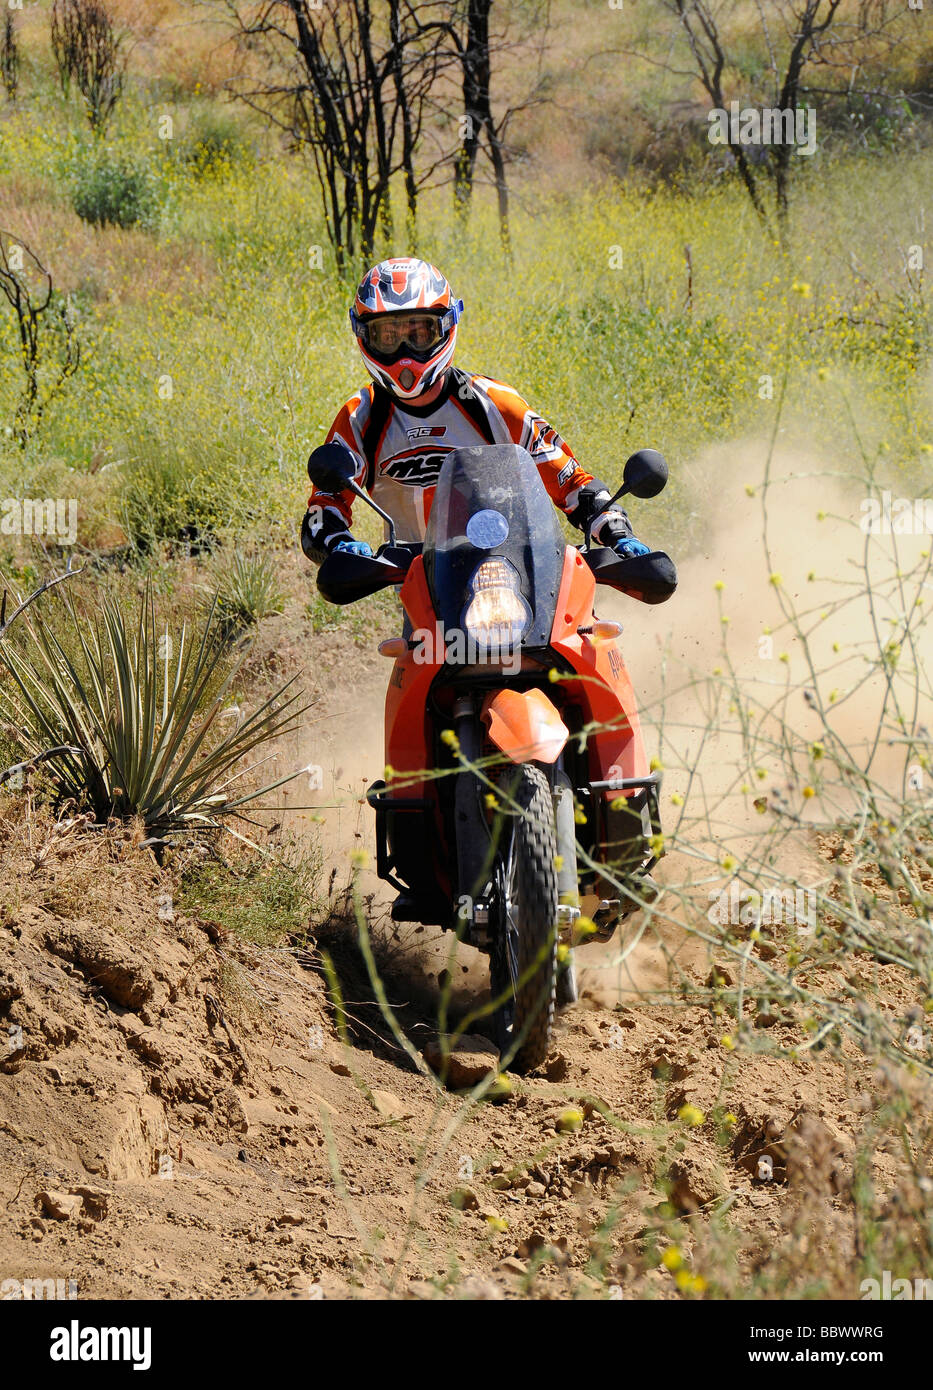 Dualsort rider in a dirt trail Stock Photo